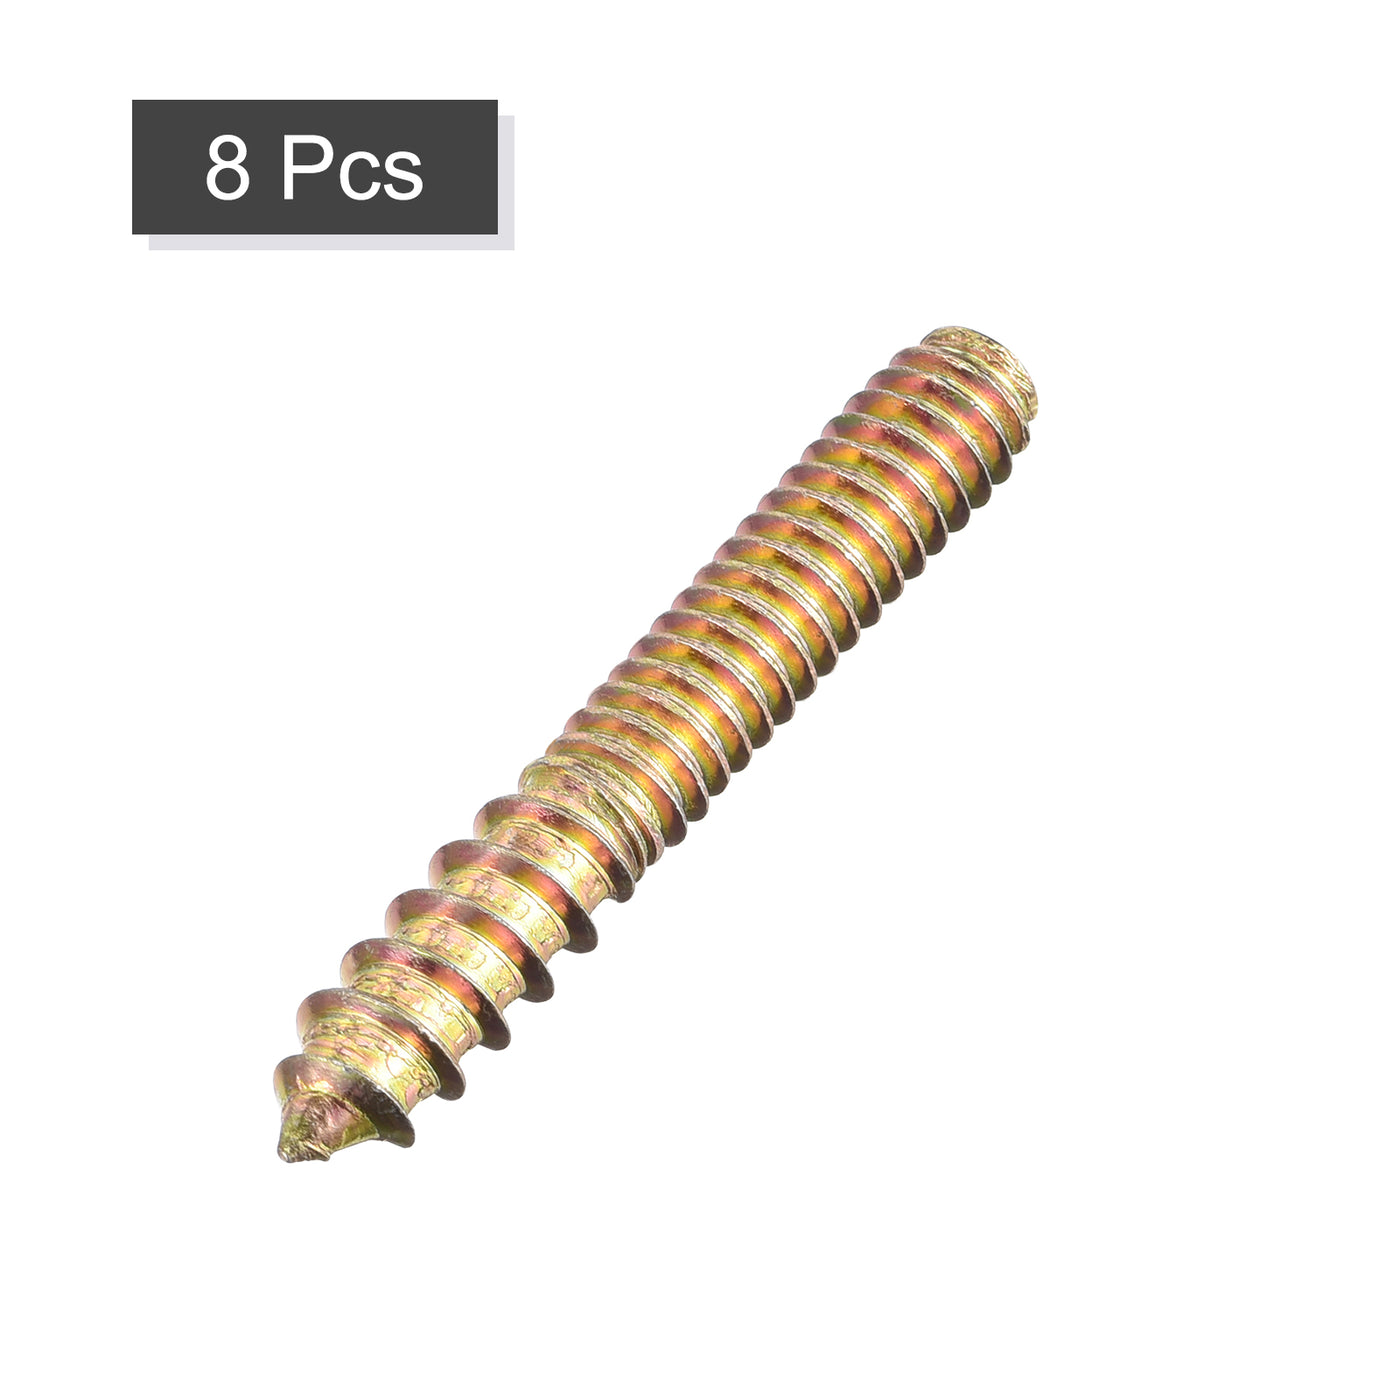 uxcell Uxcell Hanger Bolts, Double Ended Screws Wood Dowel Screws for Furniture